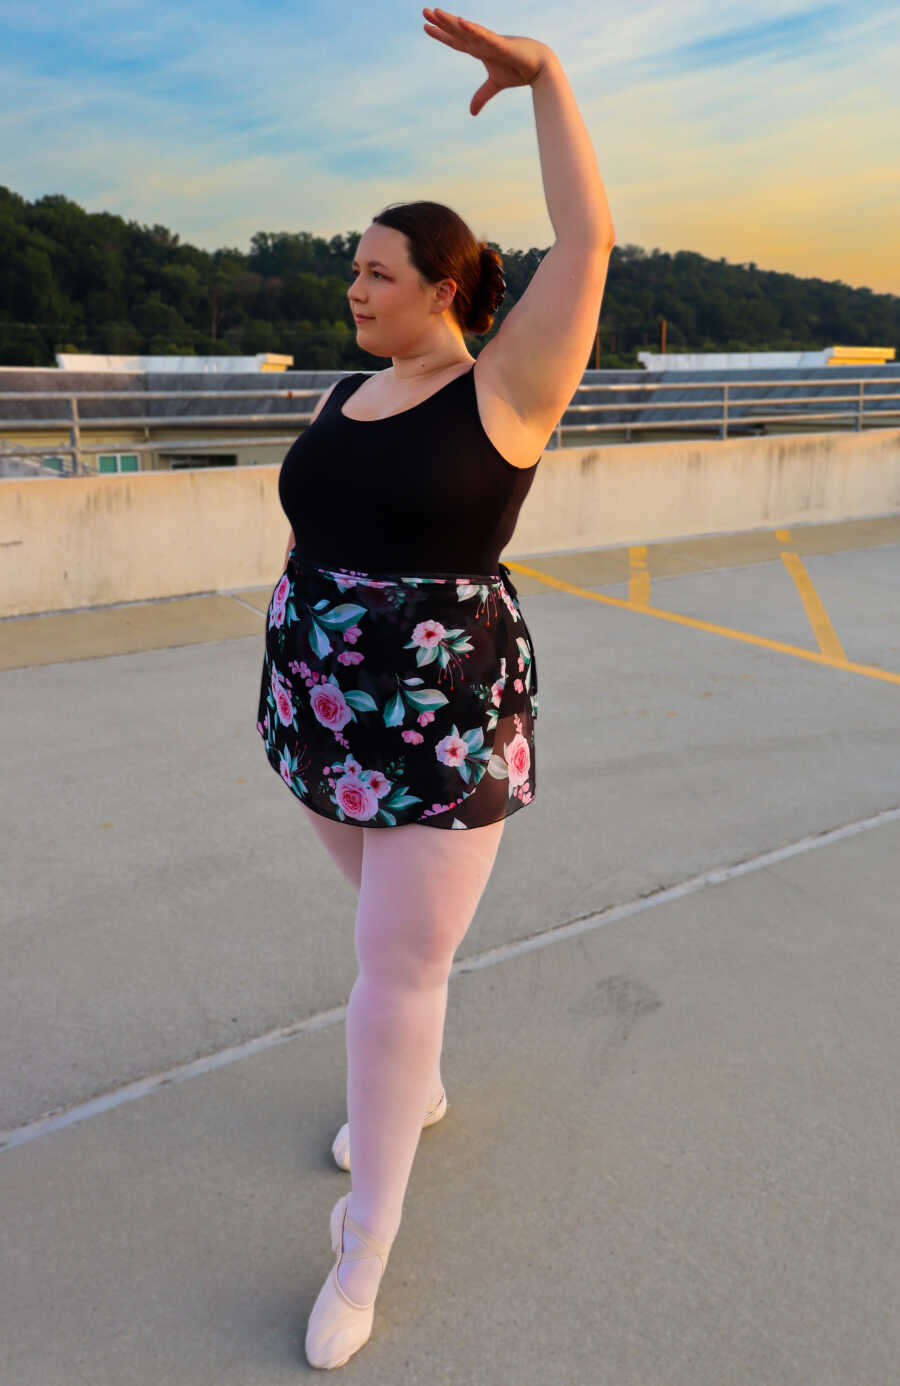 25 year old ballerina poses outside 